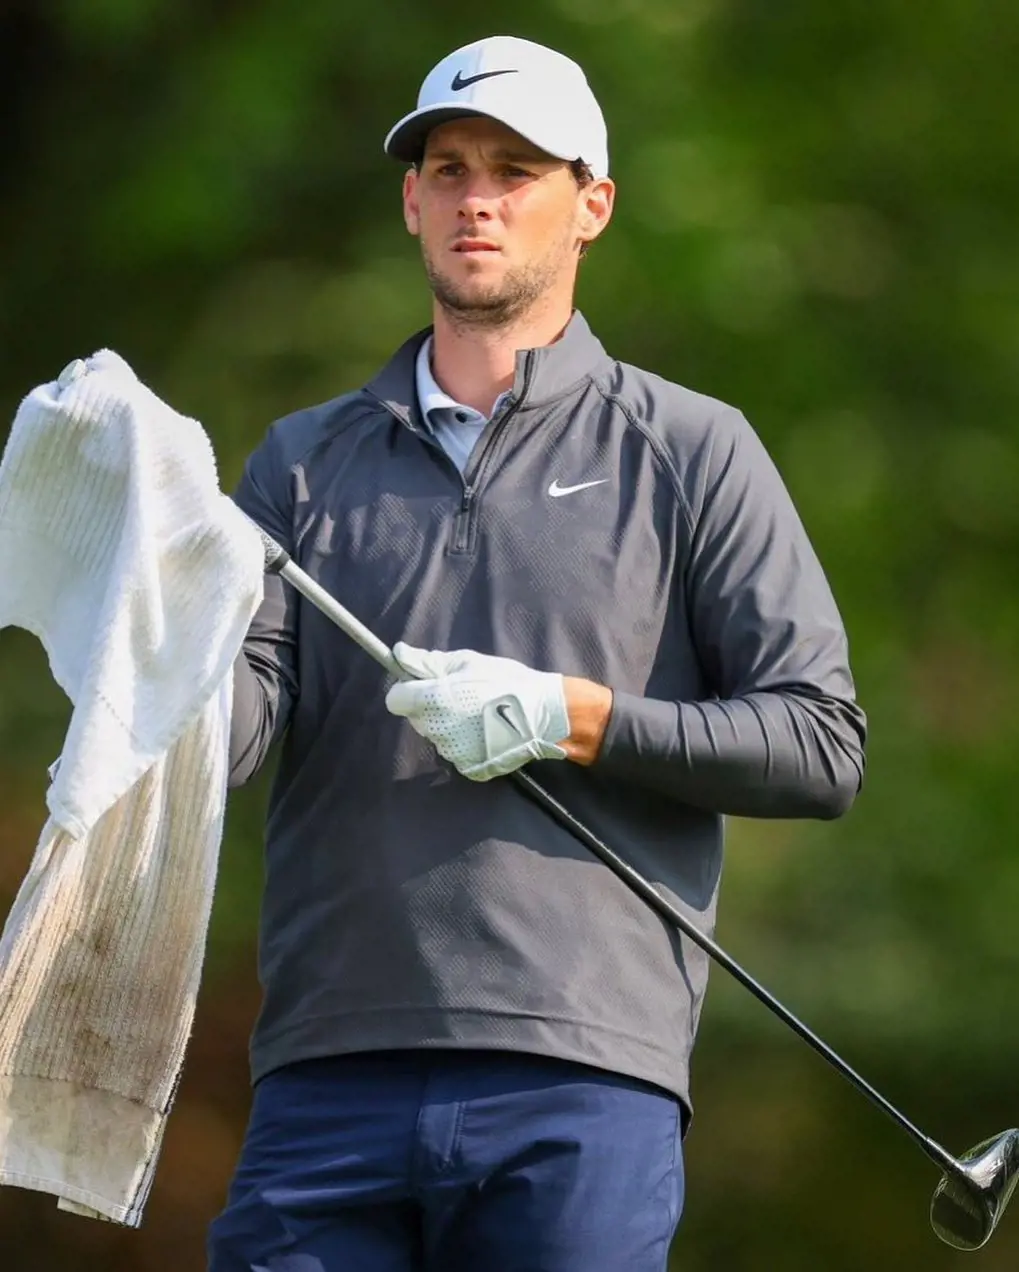 Thomas during his participation in the 2022 PGA Championship.